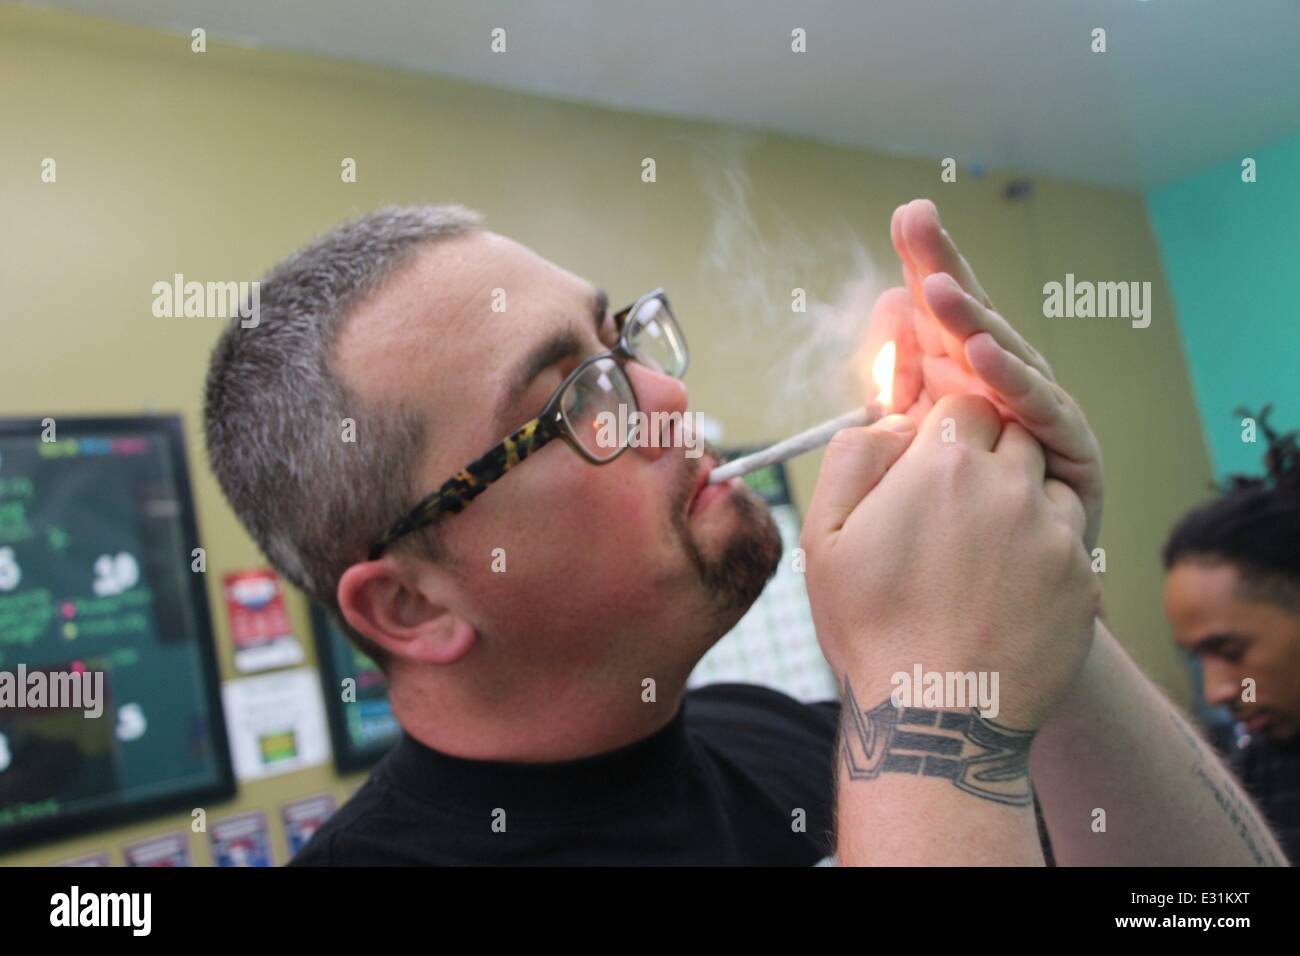 James Wade smoking a cigarette (or weed)
